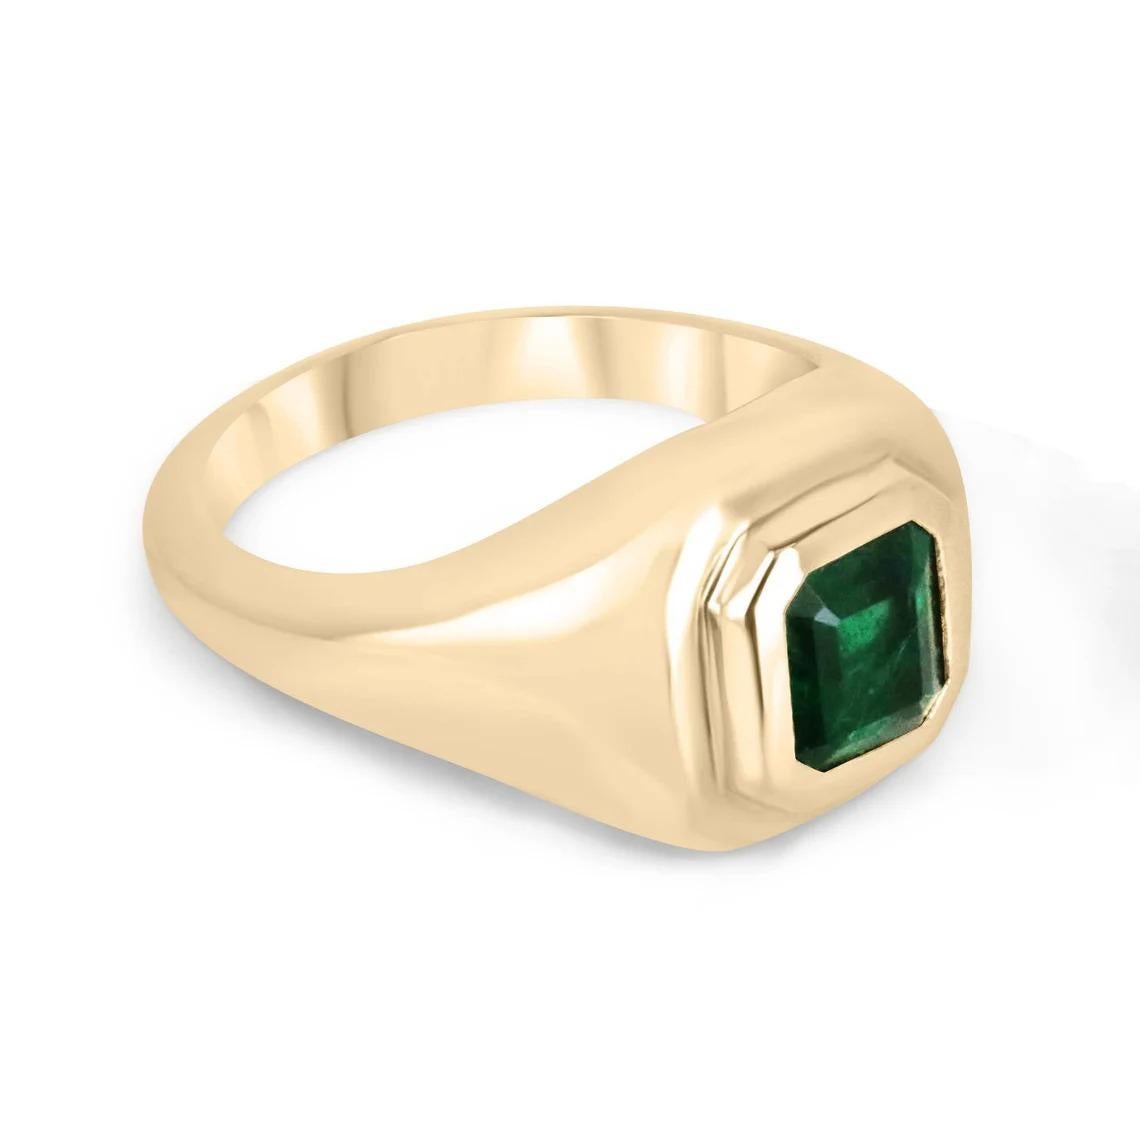 Introducing a captivating unisex emerald solitaire gold ring, featuring a striking 1.48-carat emerald of unparalleled beauty. The emerald boasts an intensely rich dark green color that commands attention, while its unique characteristics set it